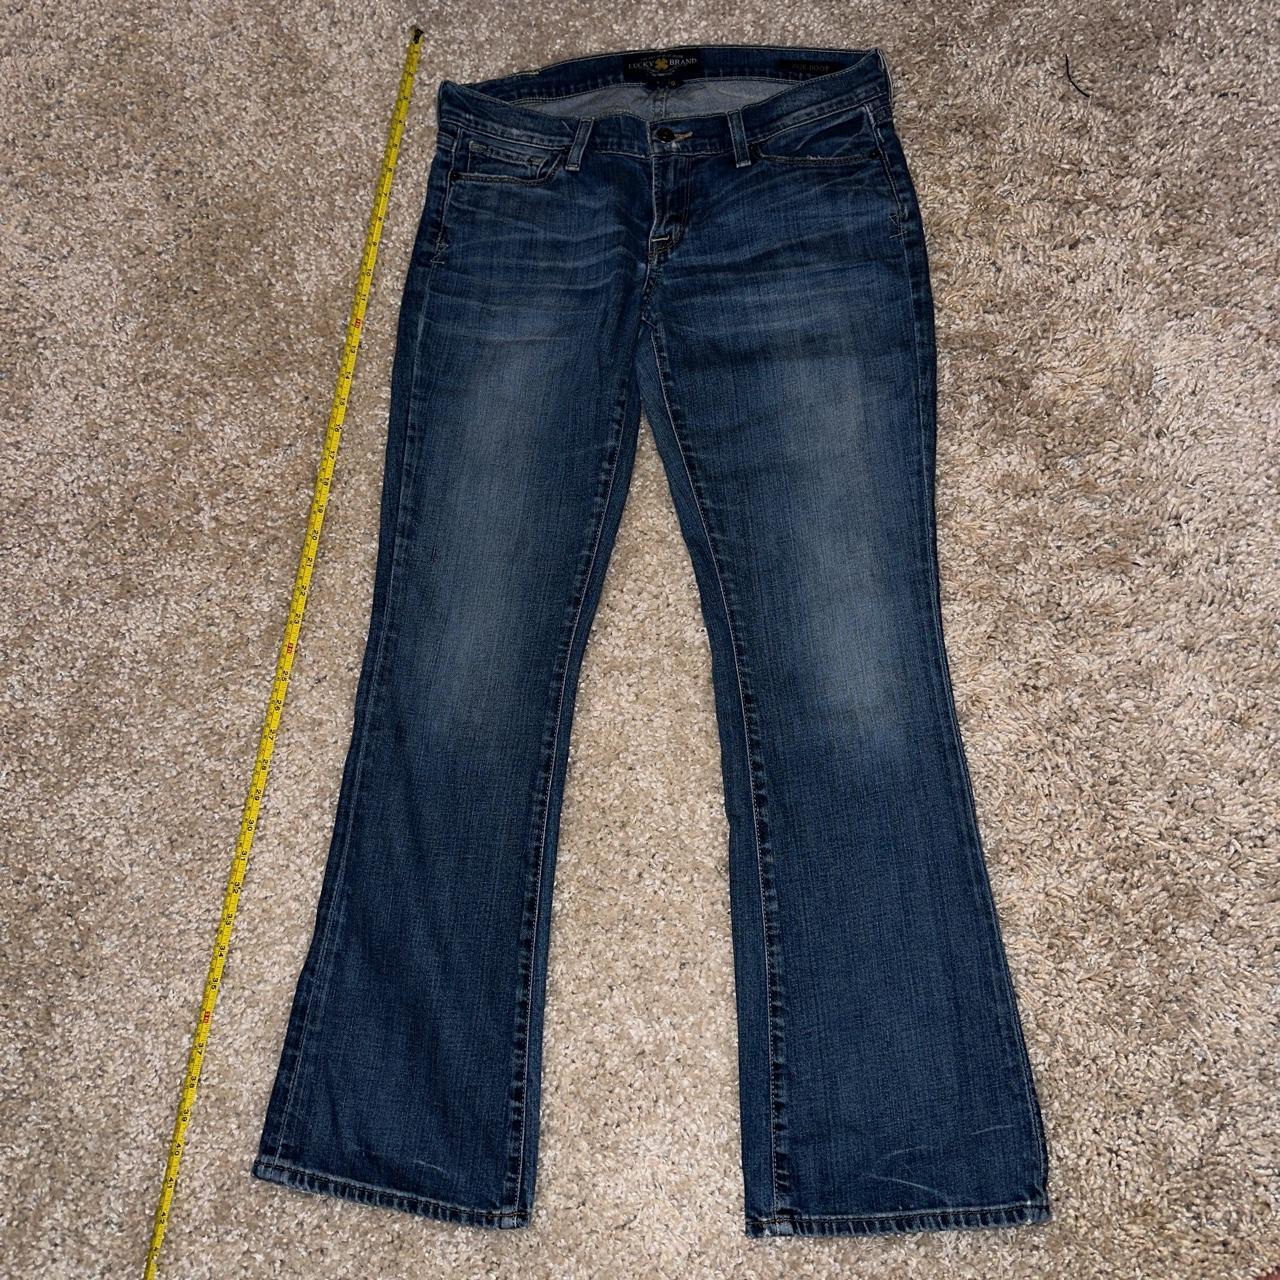 Y2K Low waisted lucky Jeans Size 2 #Y2K - Depop